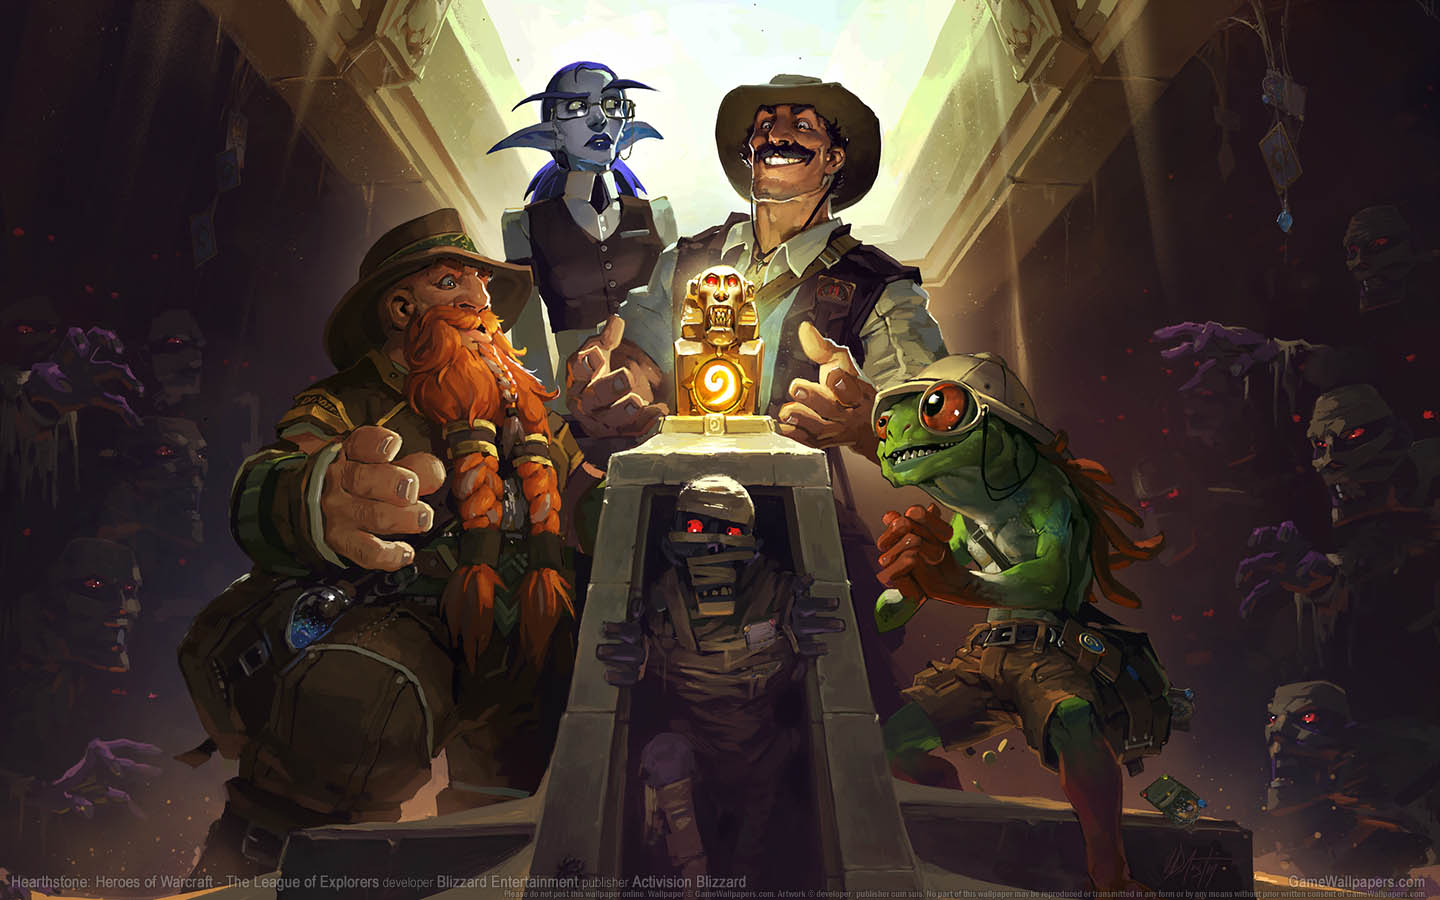 Hearthstone: Heroes of Warcraft - The League of Explorers fond d'cran 01 1440x900